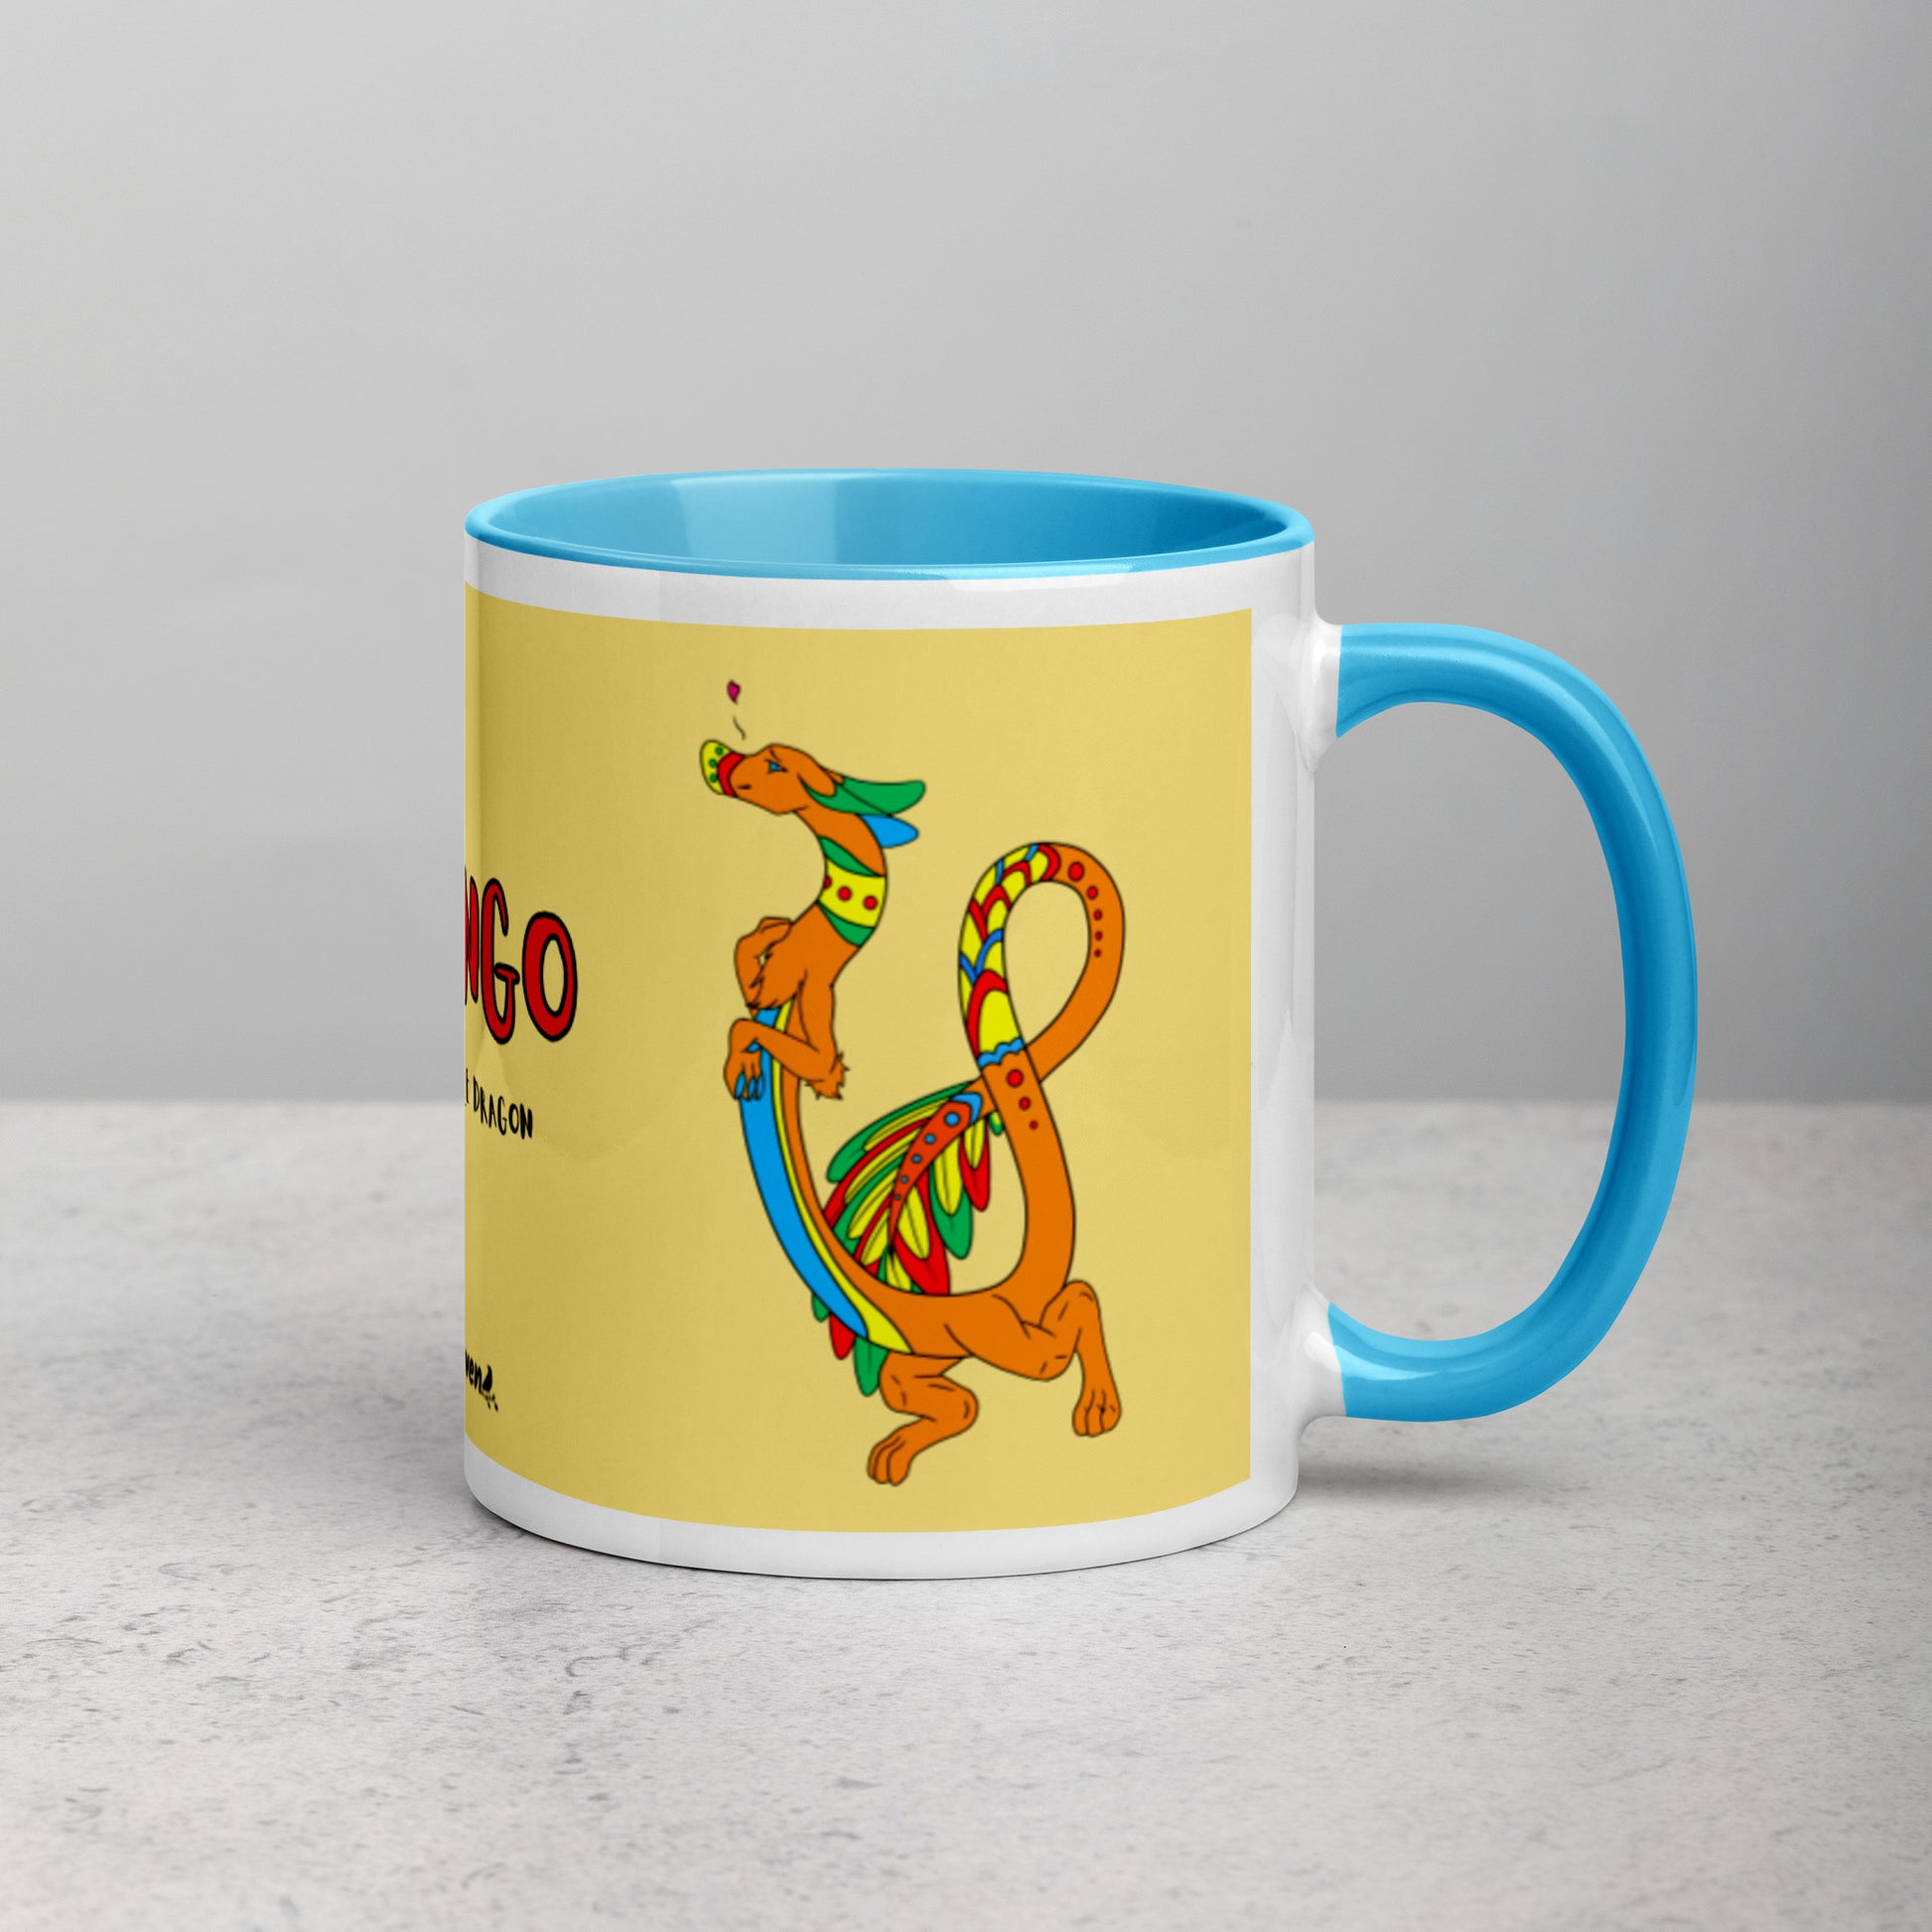 11 ounce white ceramic mug featuring a double-sided image of Domingo the Fuzzy Noodle Dragon against a light yellow background. Blue inside and handle color. Shown on tabletop with handle facing right.